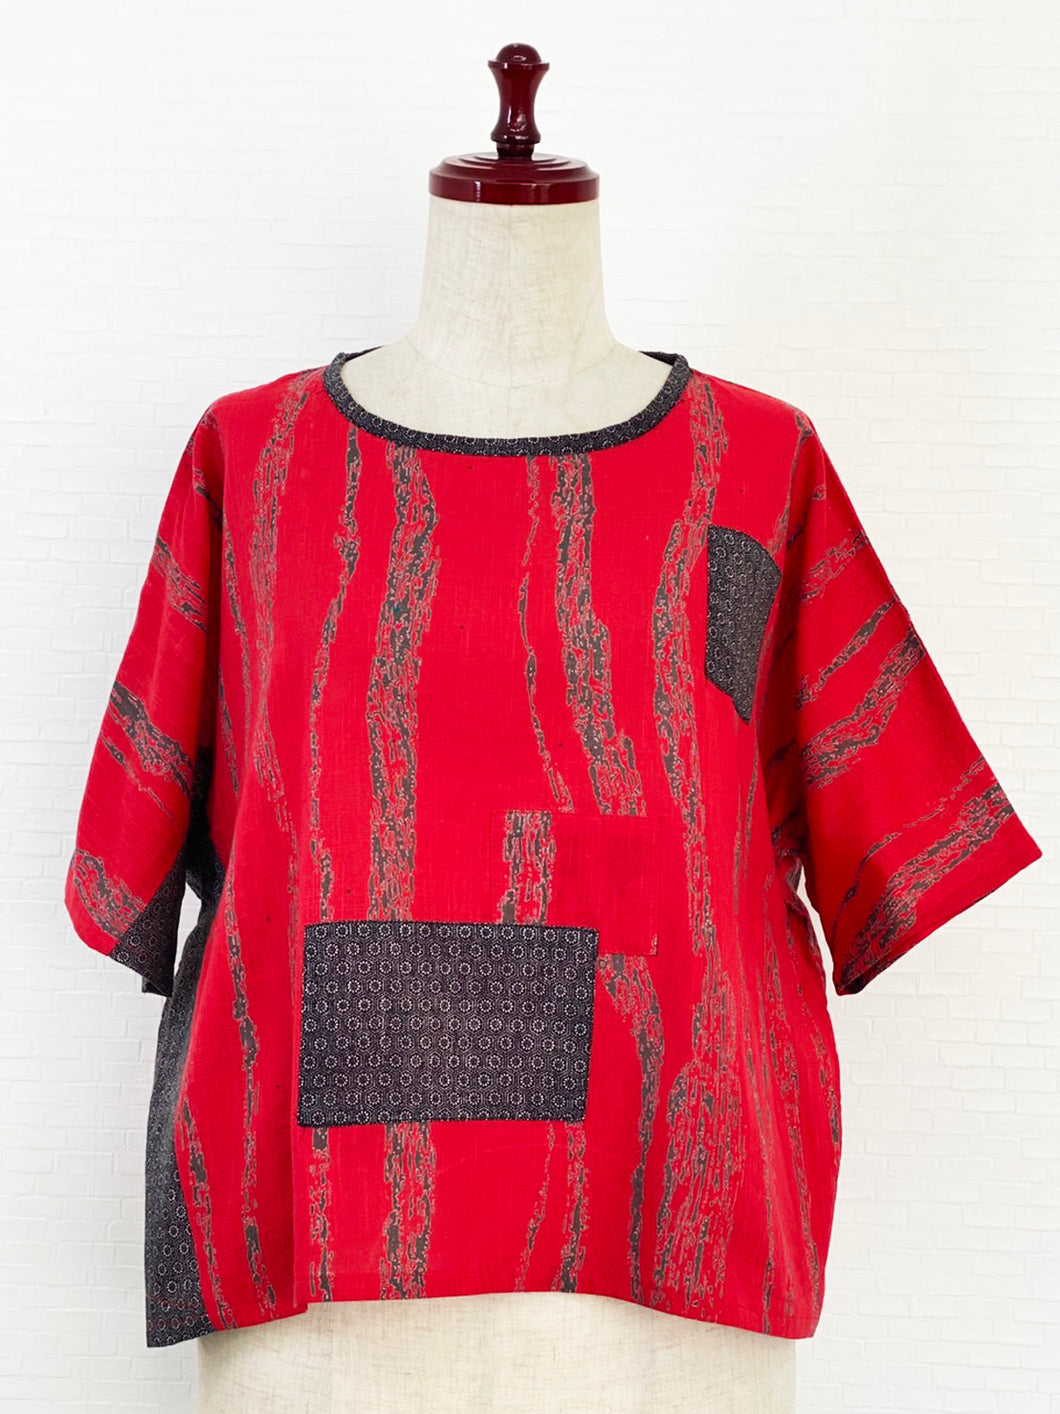 Panel Crop Top - Stream Print w/ Textile Patch - Red